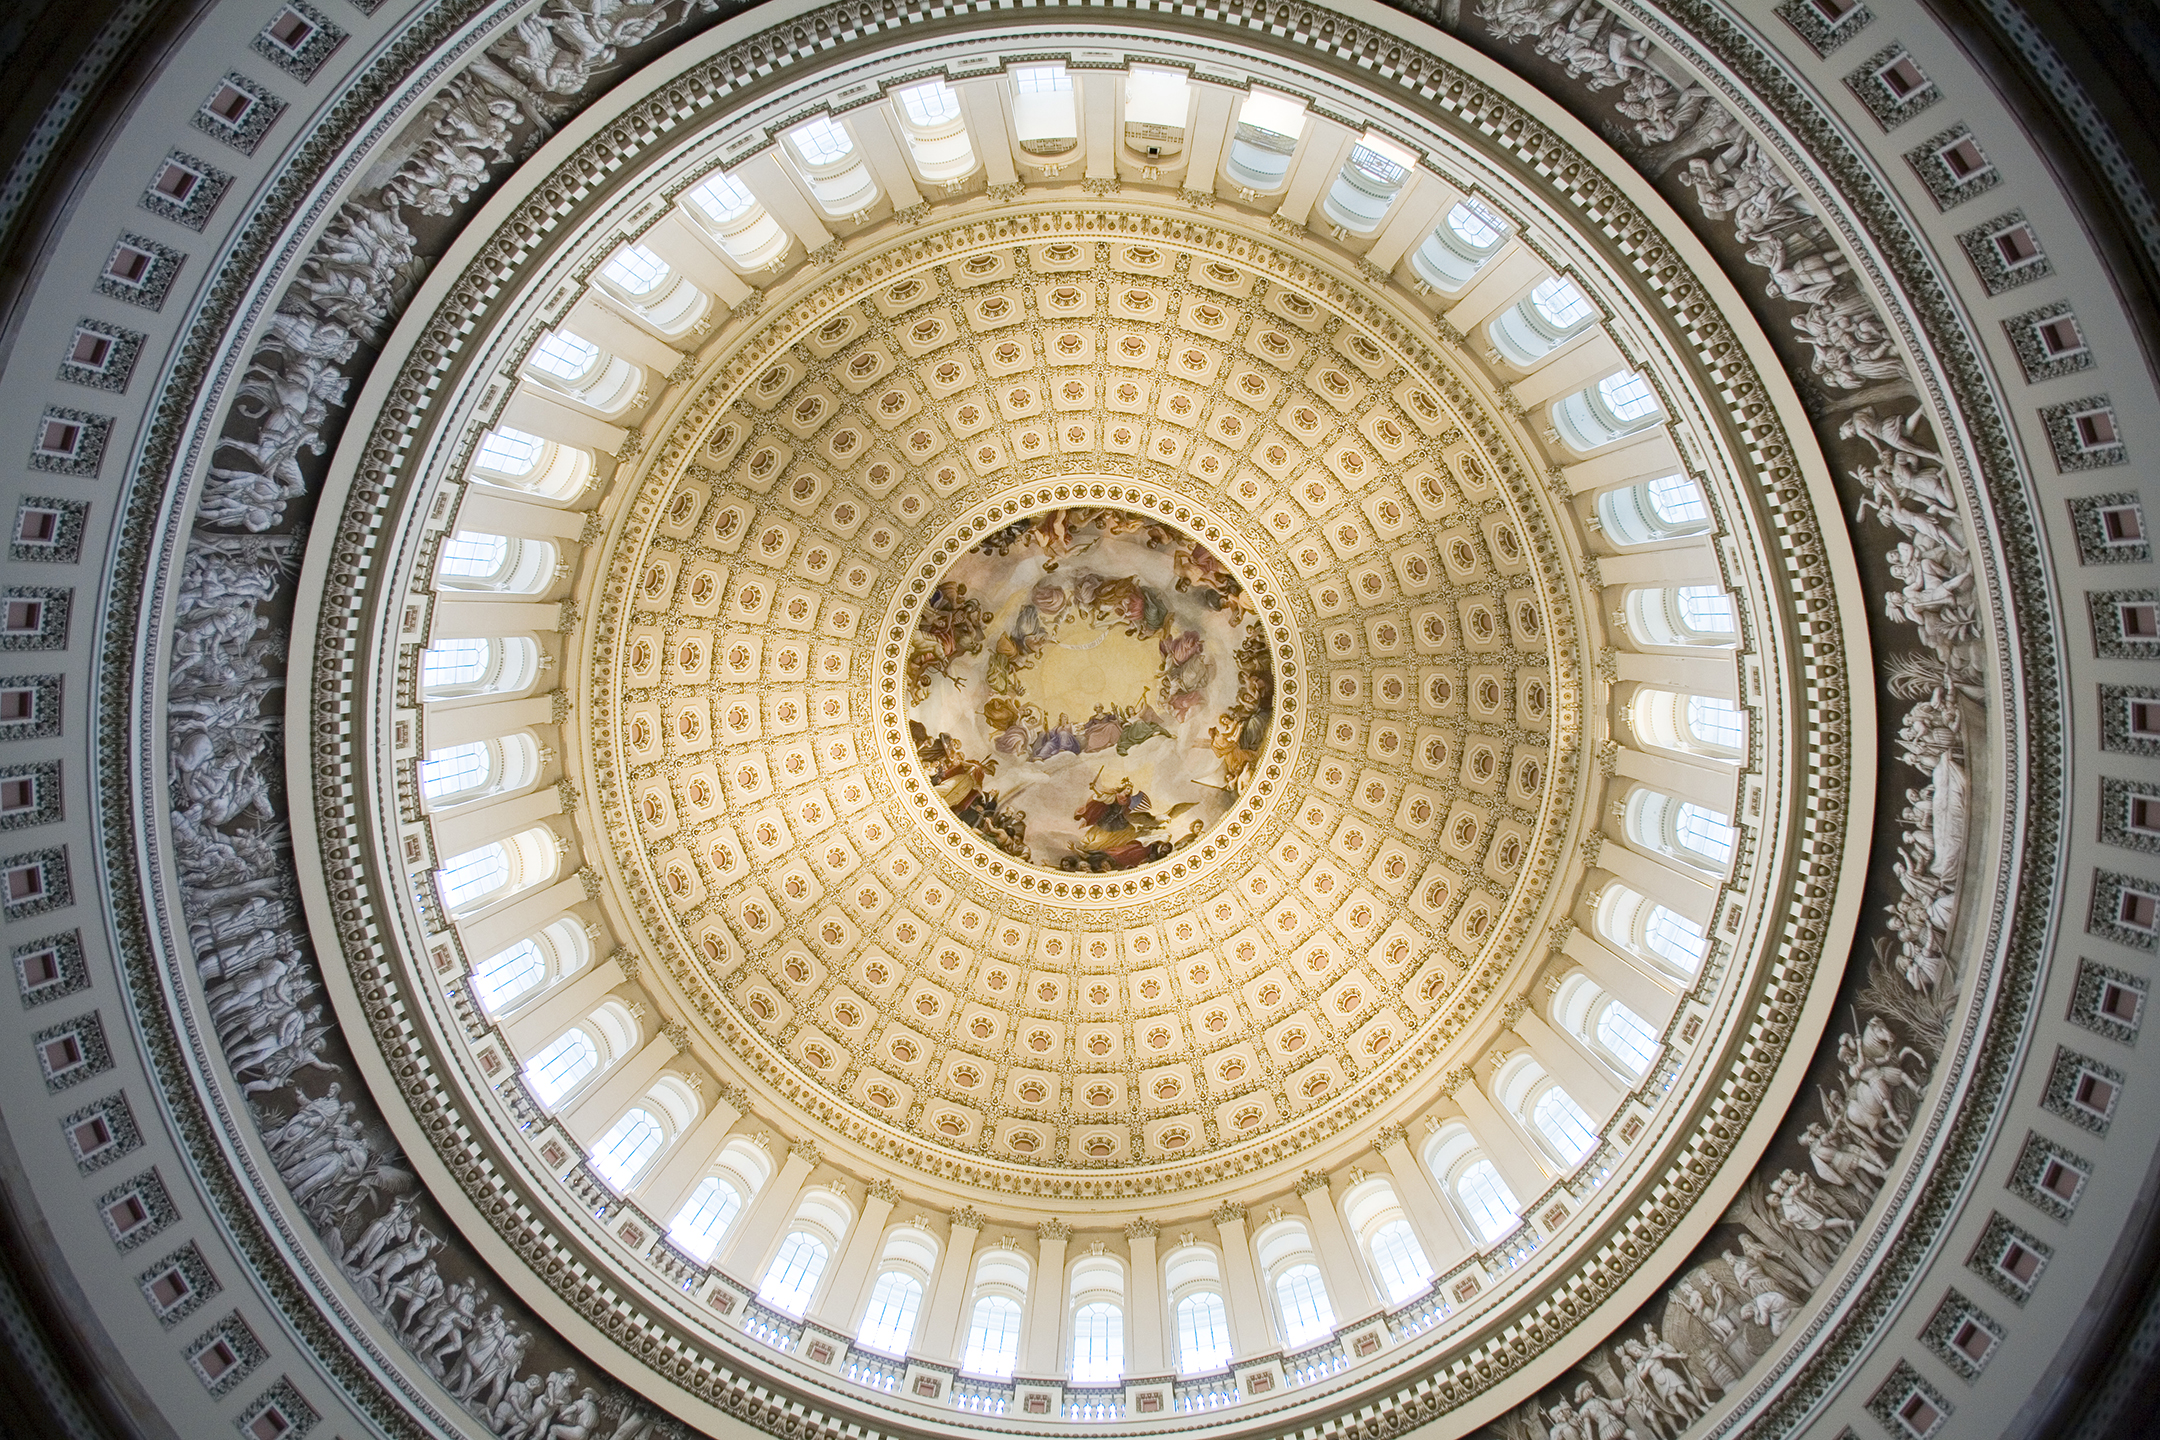 Dome of US Capitol Rotunda, seen from below looking straight up